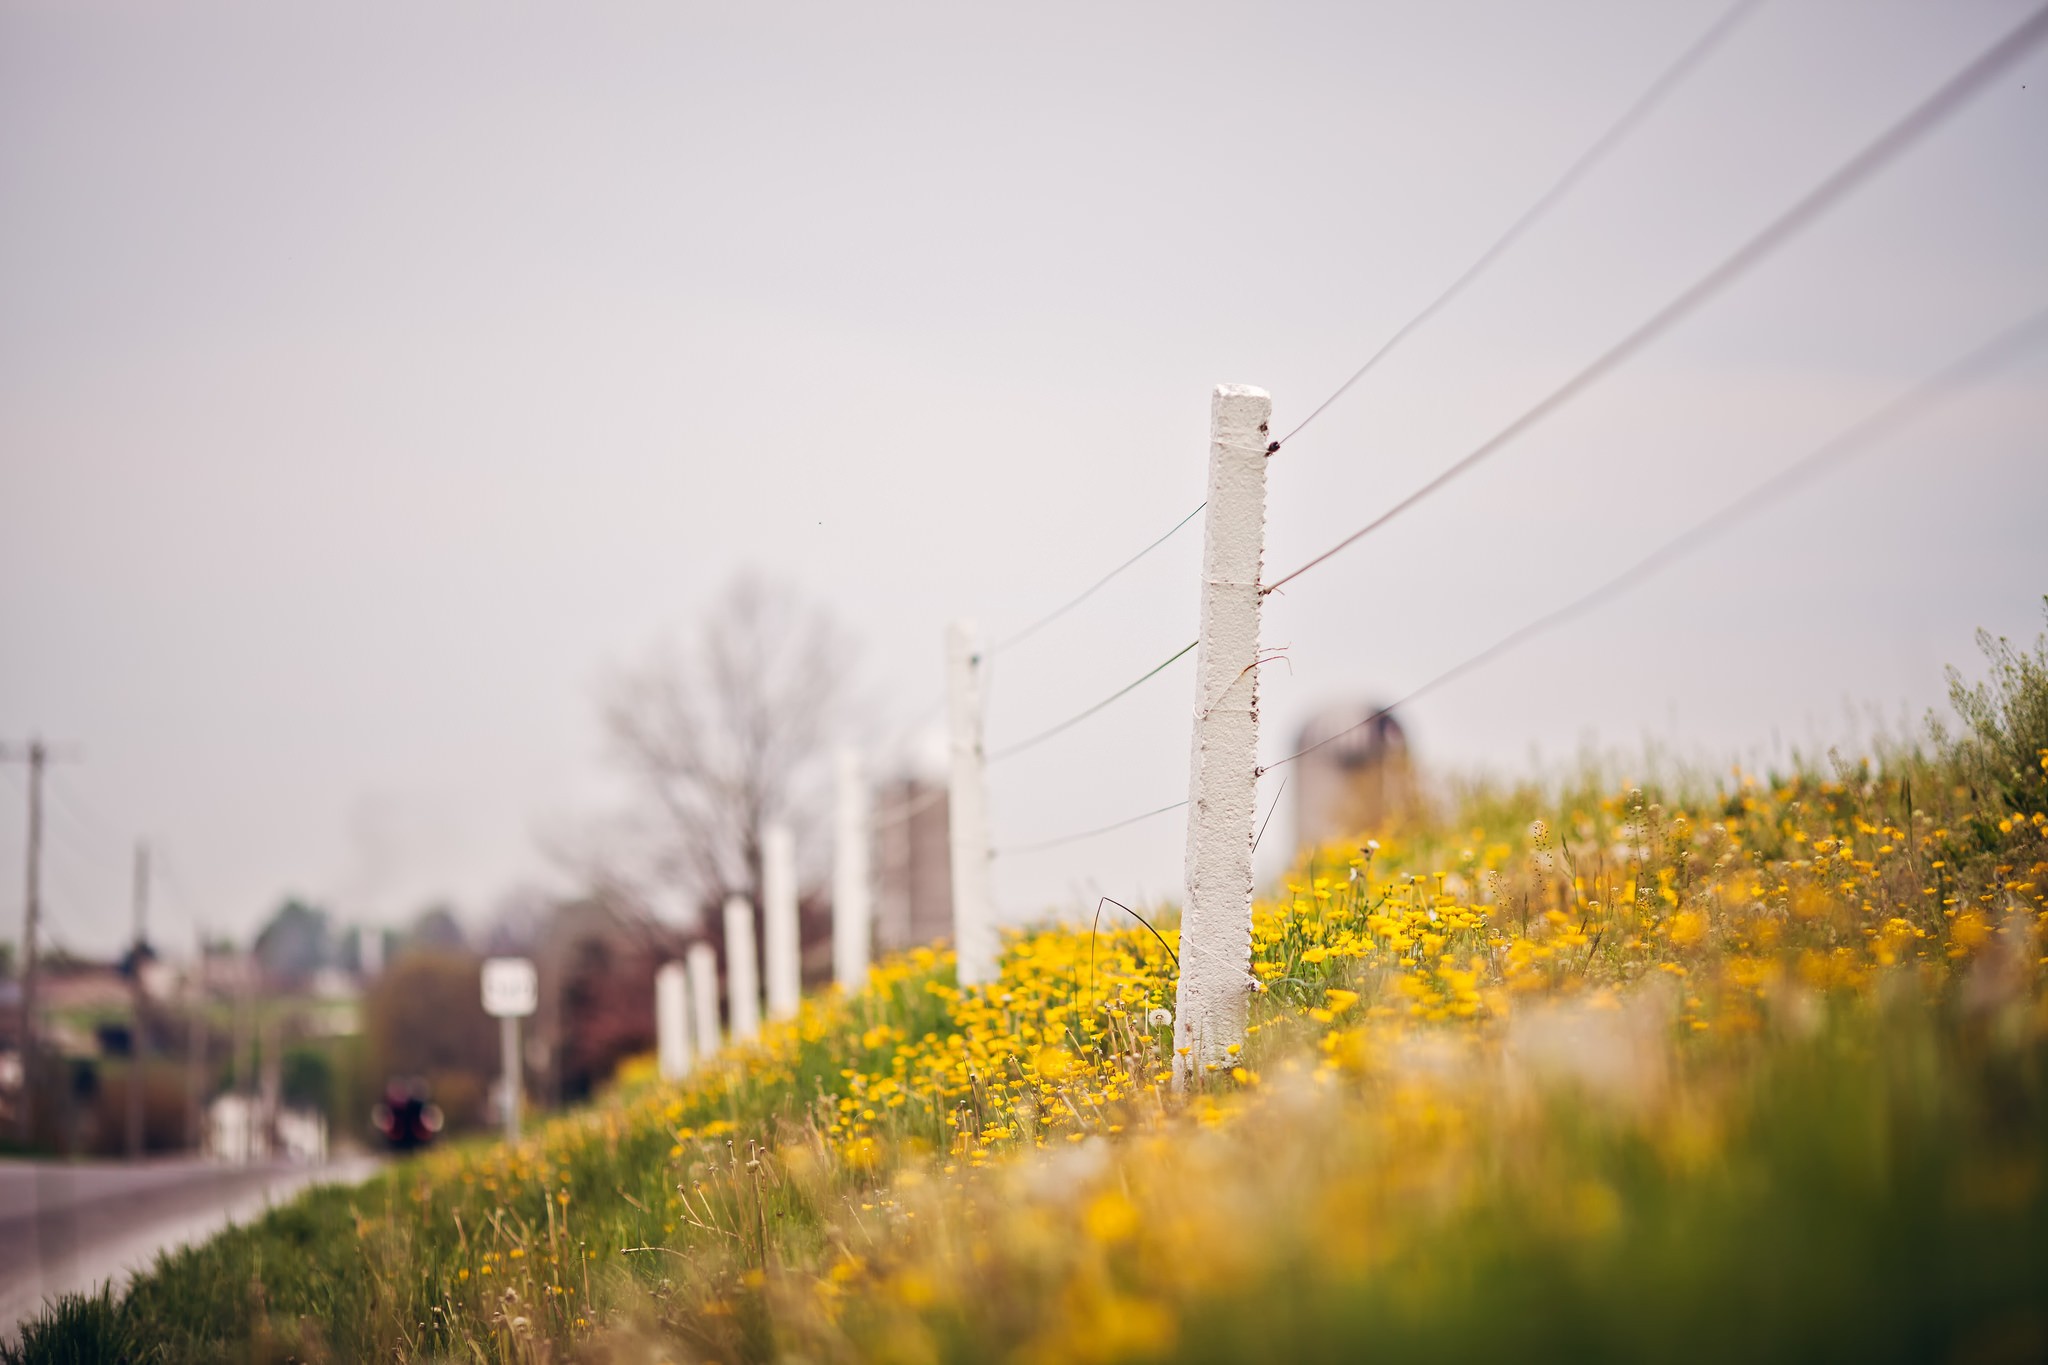 General 2048x1365 fence flowers depth of field yellow flowers outdoors